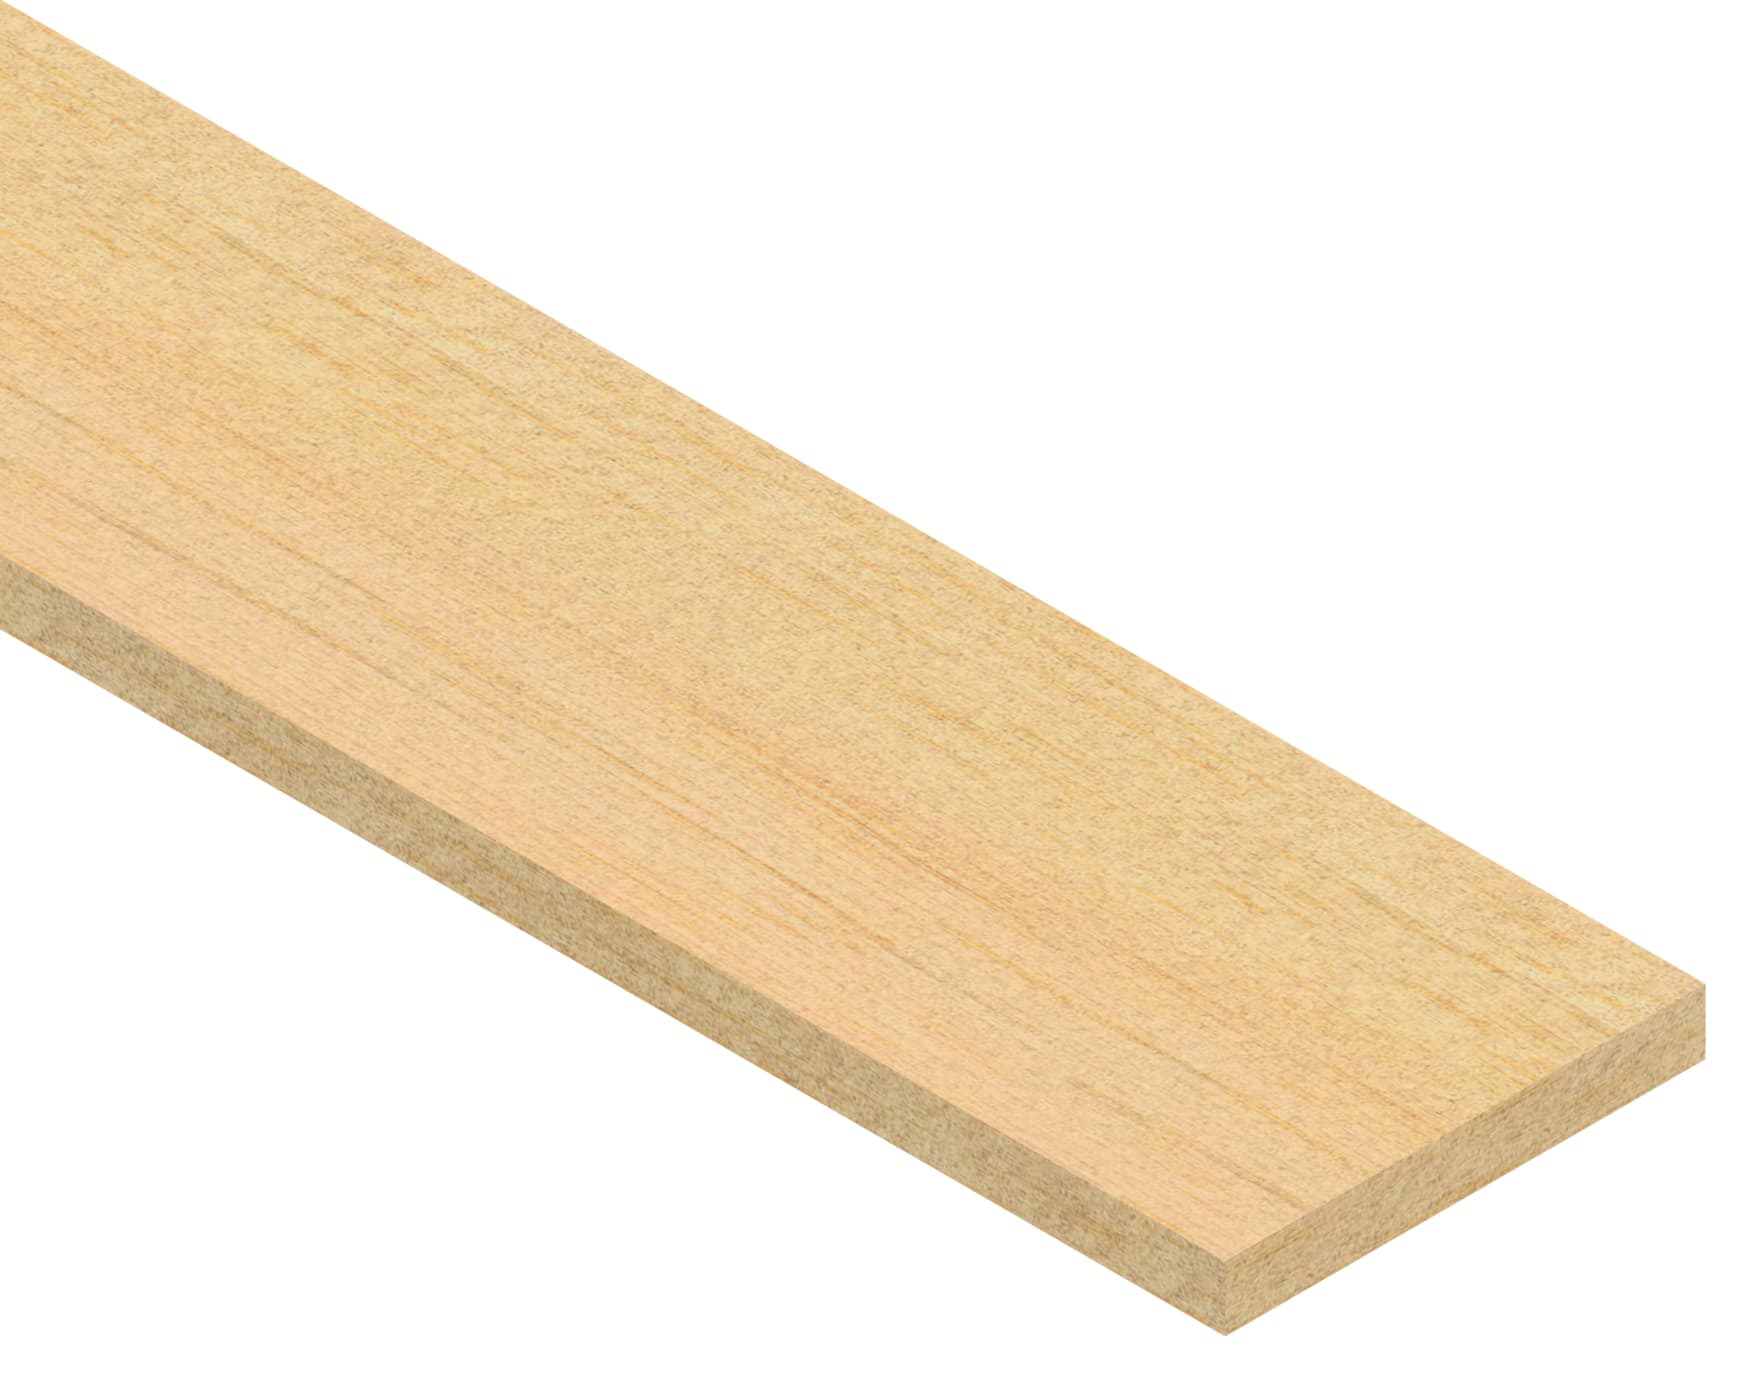 Cheshire Mouldings Pine Stripwood - 6 x 44